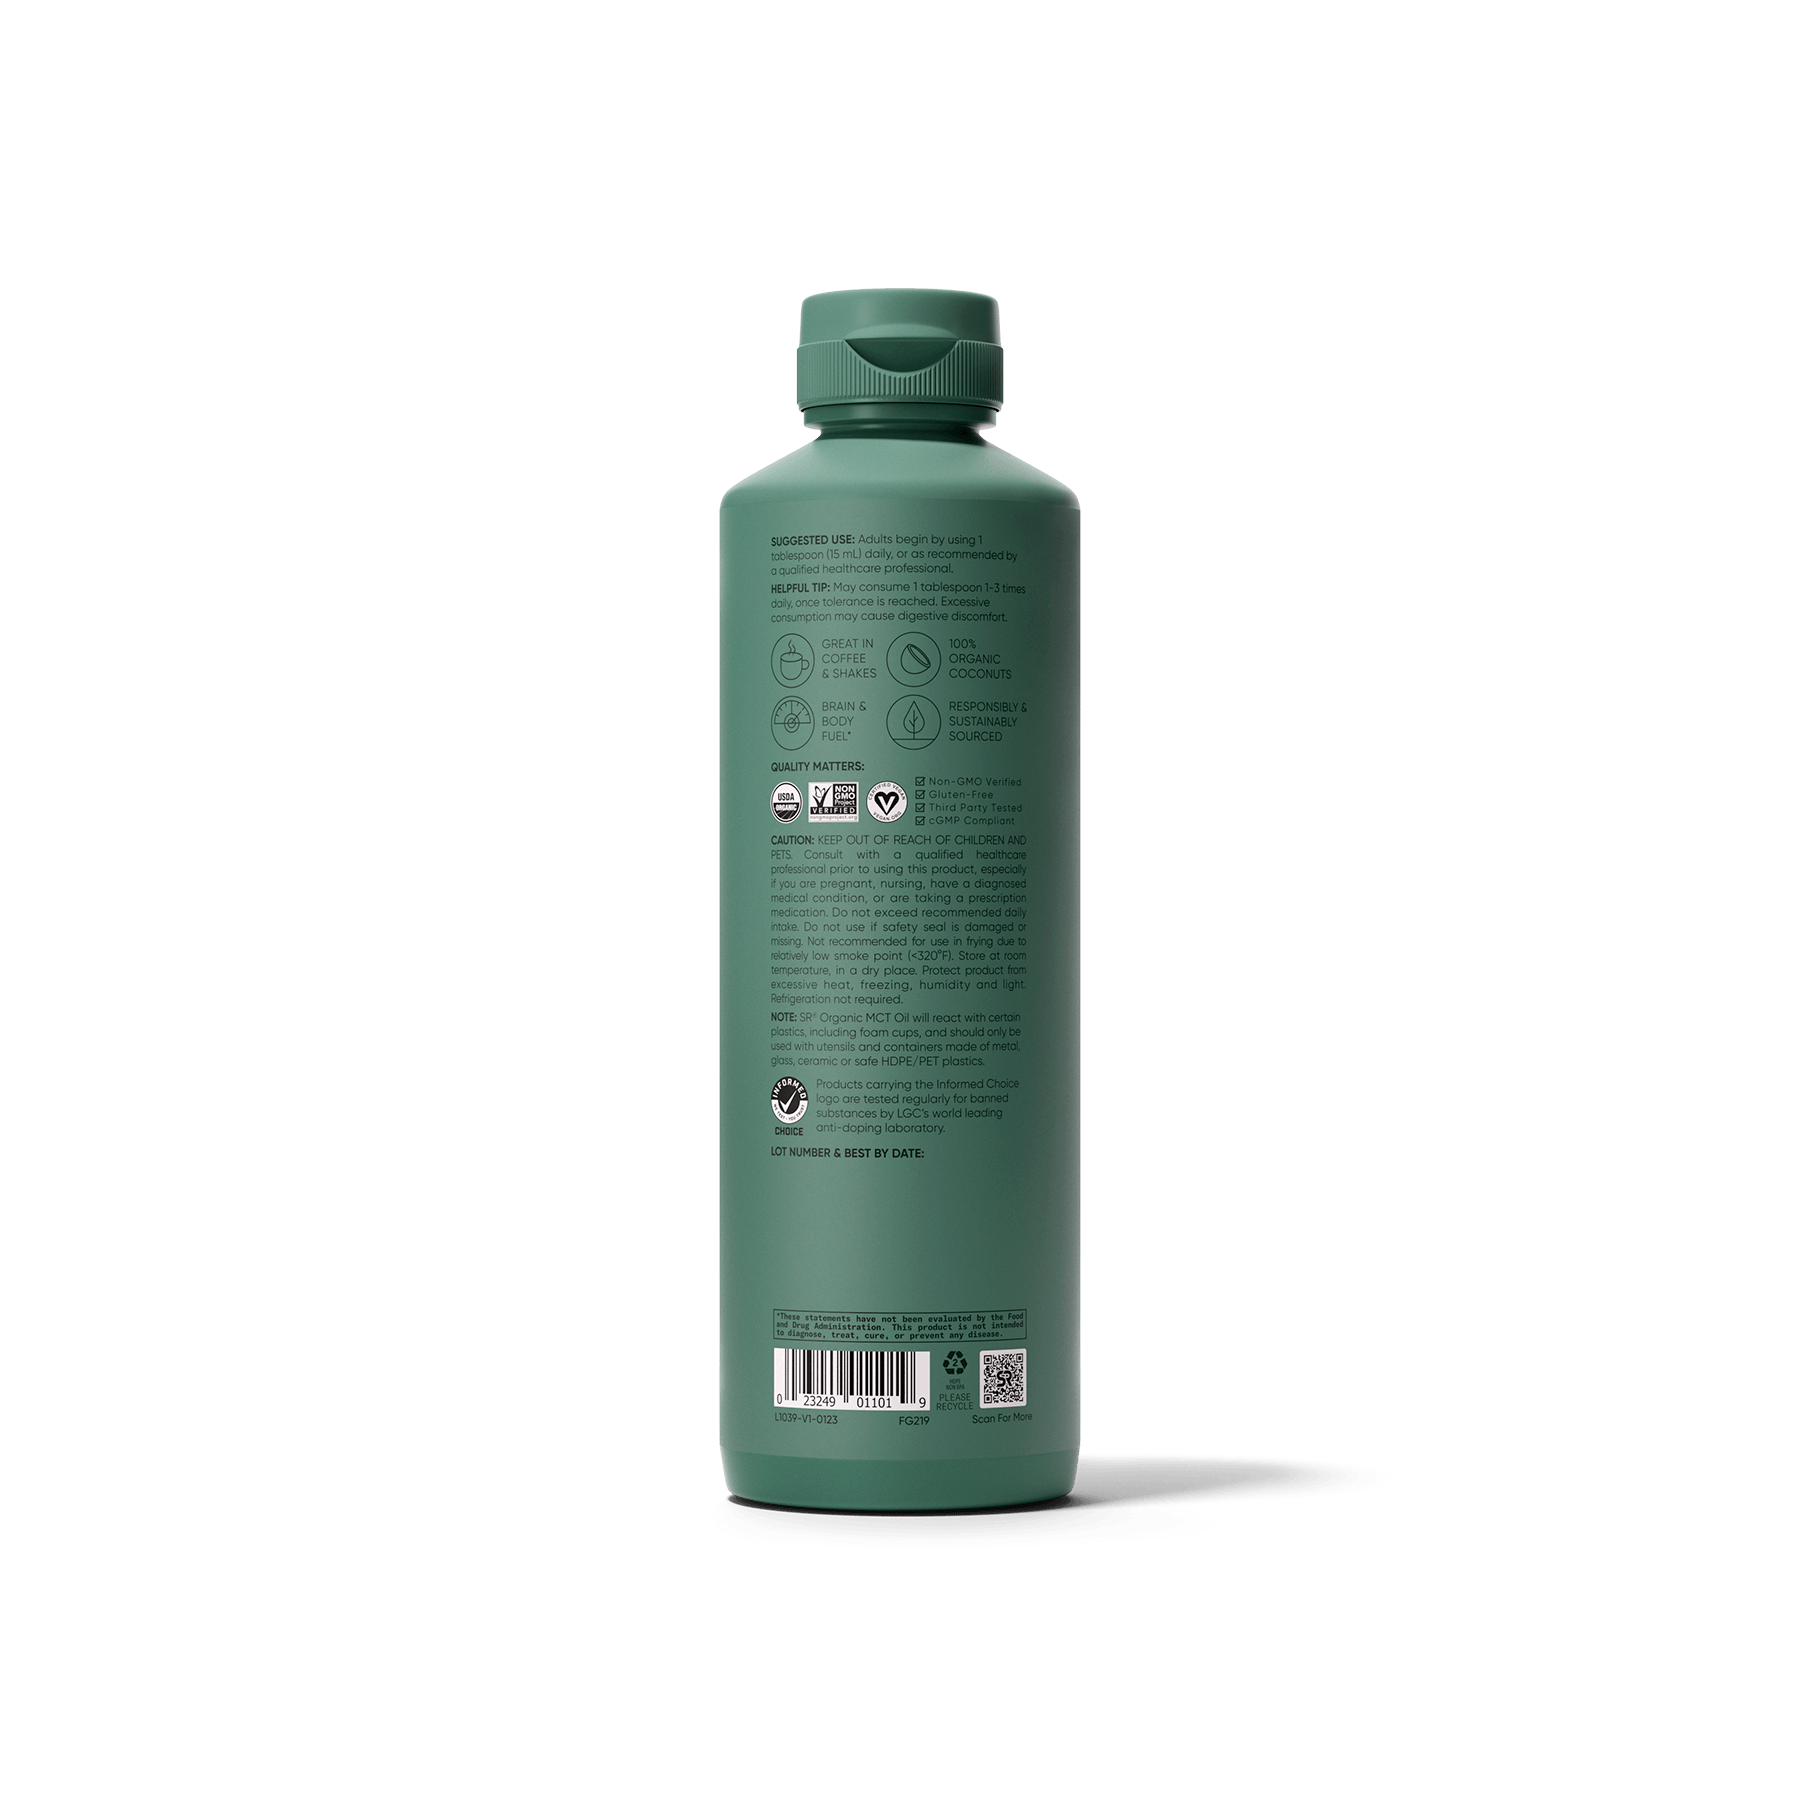 A bottle of Organic MCT Oil Full Spectrum shampoo by Sports Research on a green background.